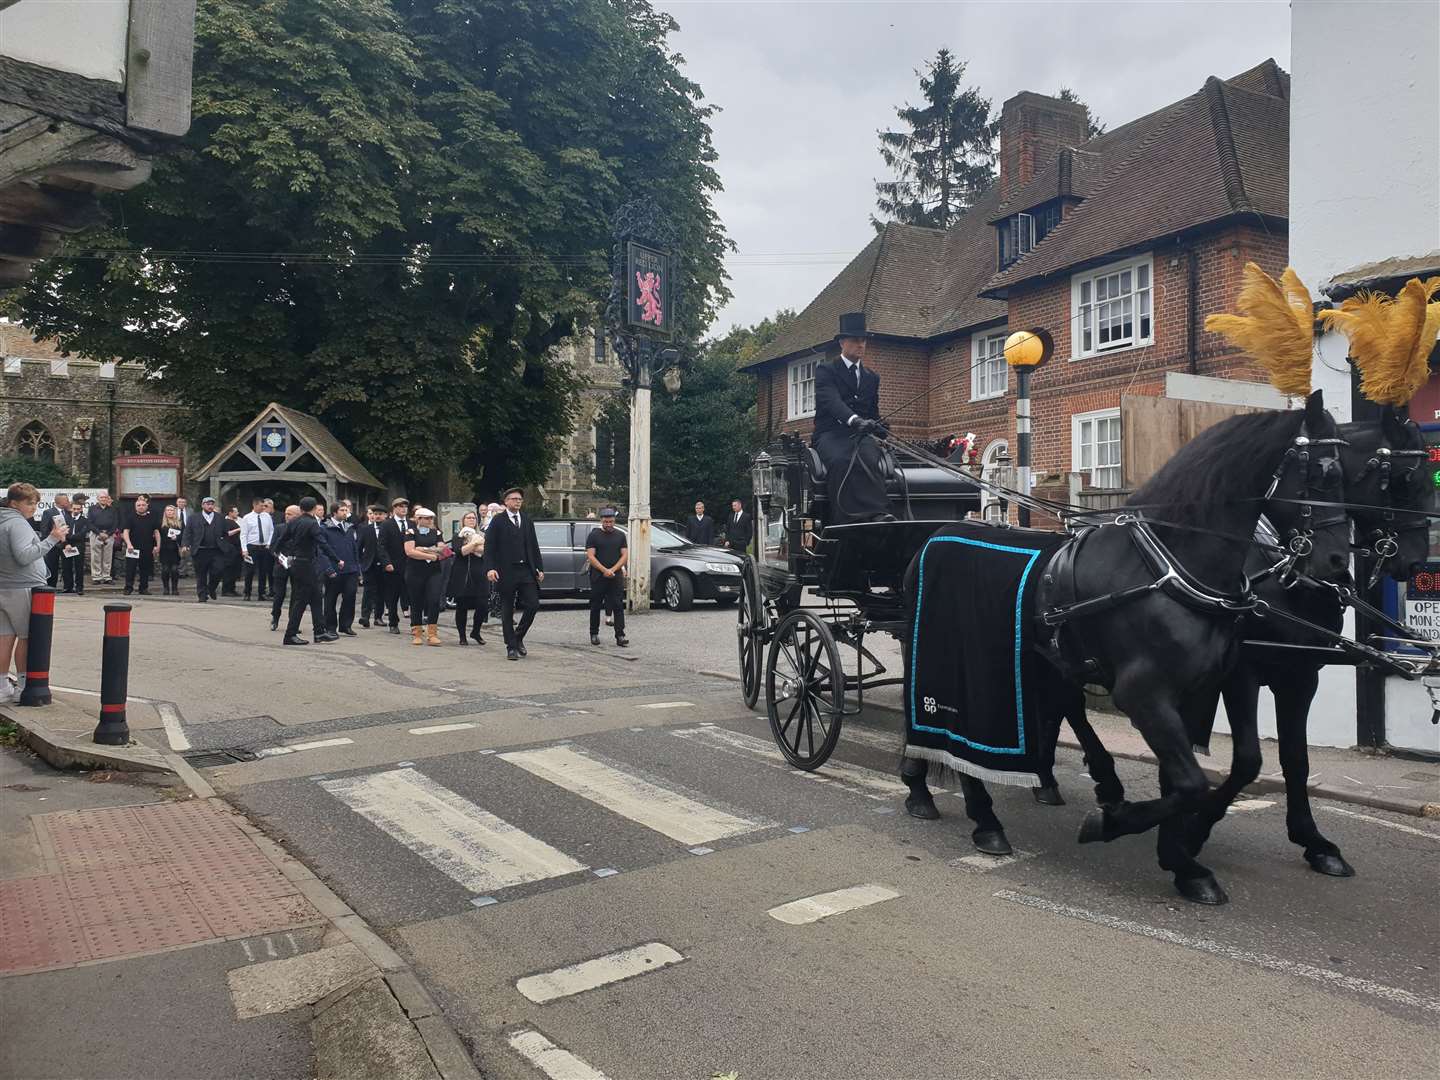 The procession leaving St Martin's Church in Herne following Lee Harlow's funeral